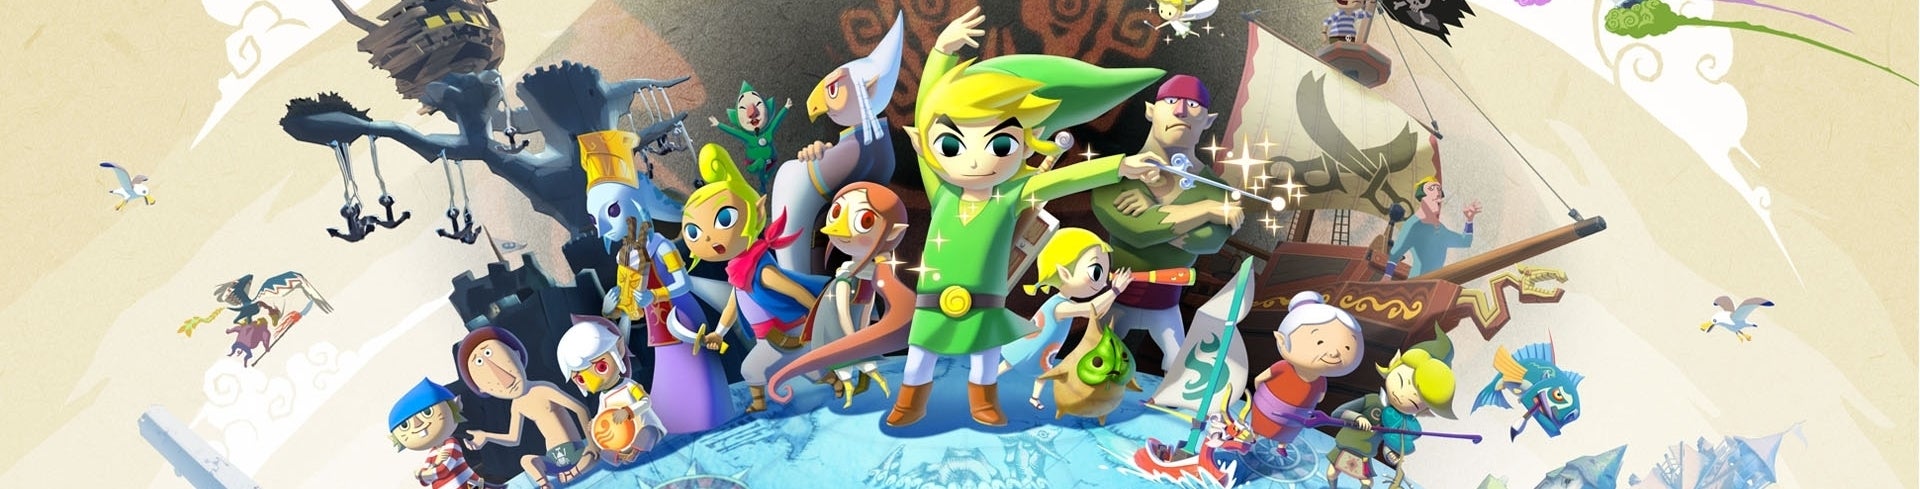 Image for The Legend of Zelda: The Wind Waker HD review